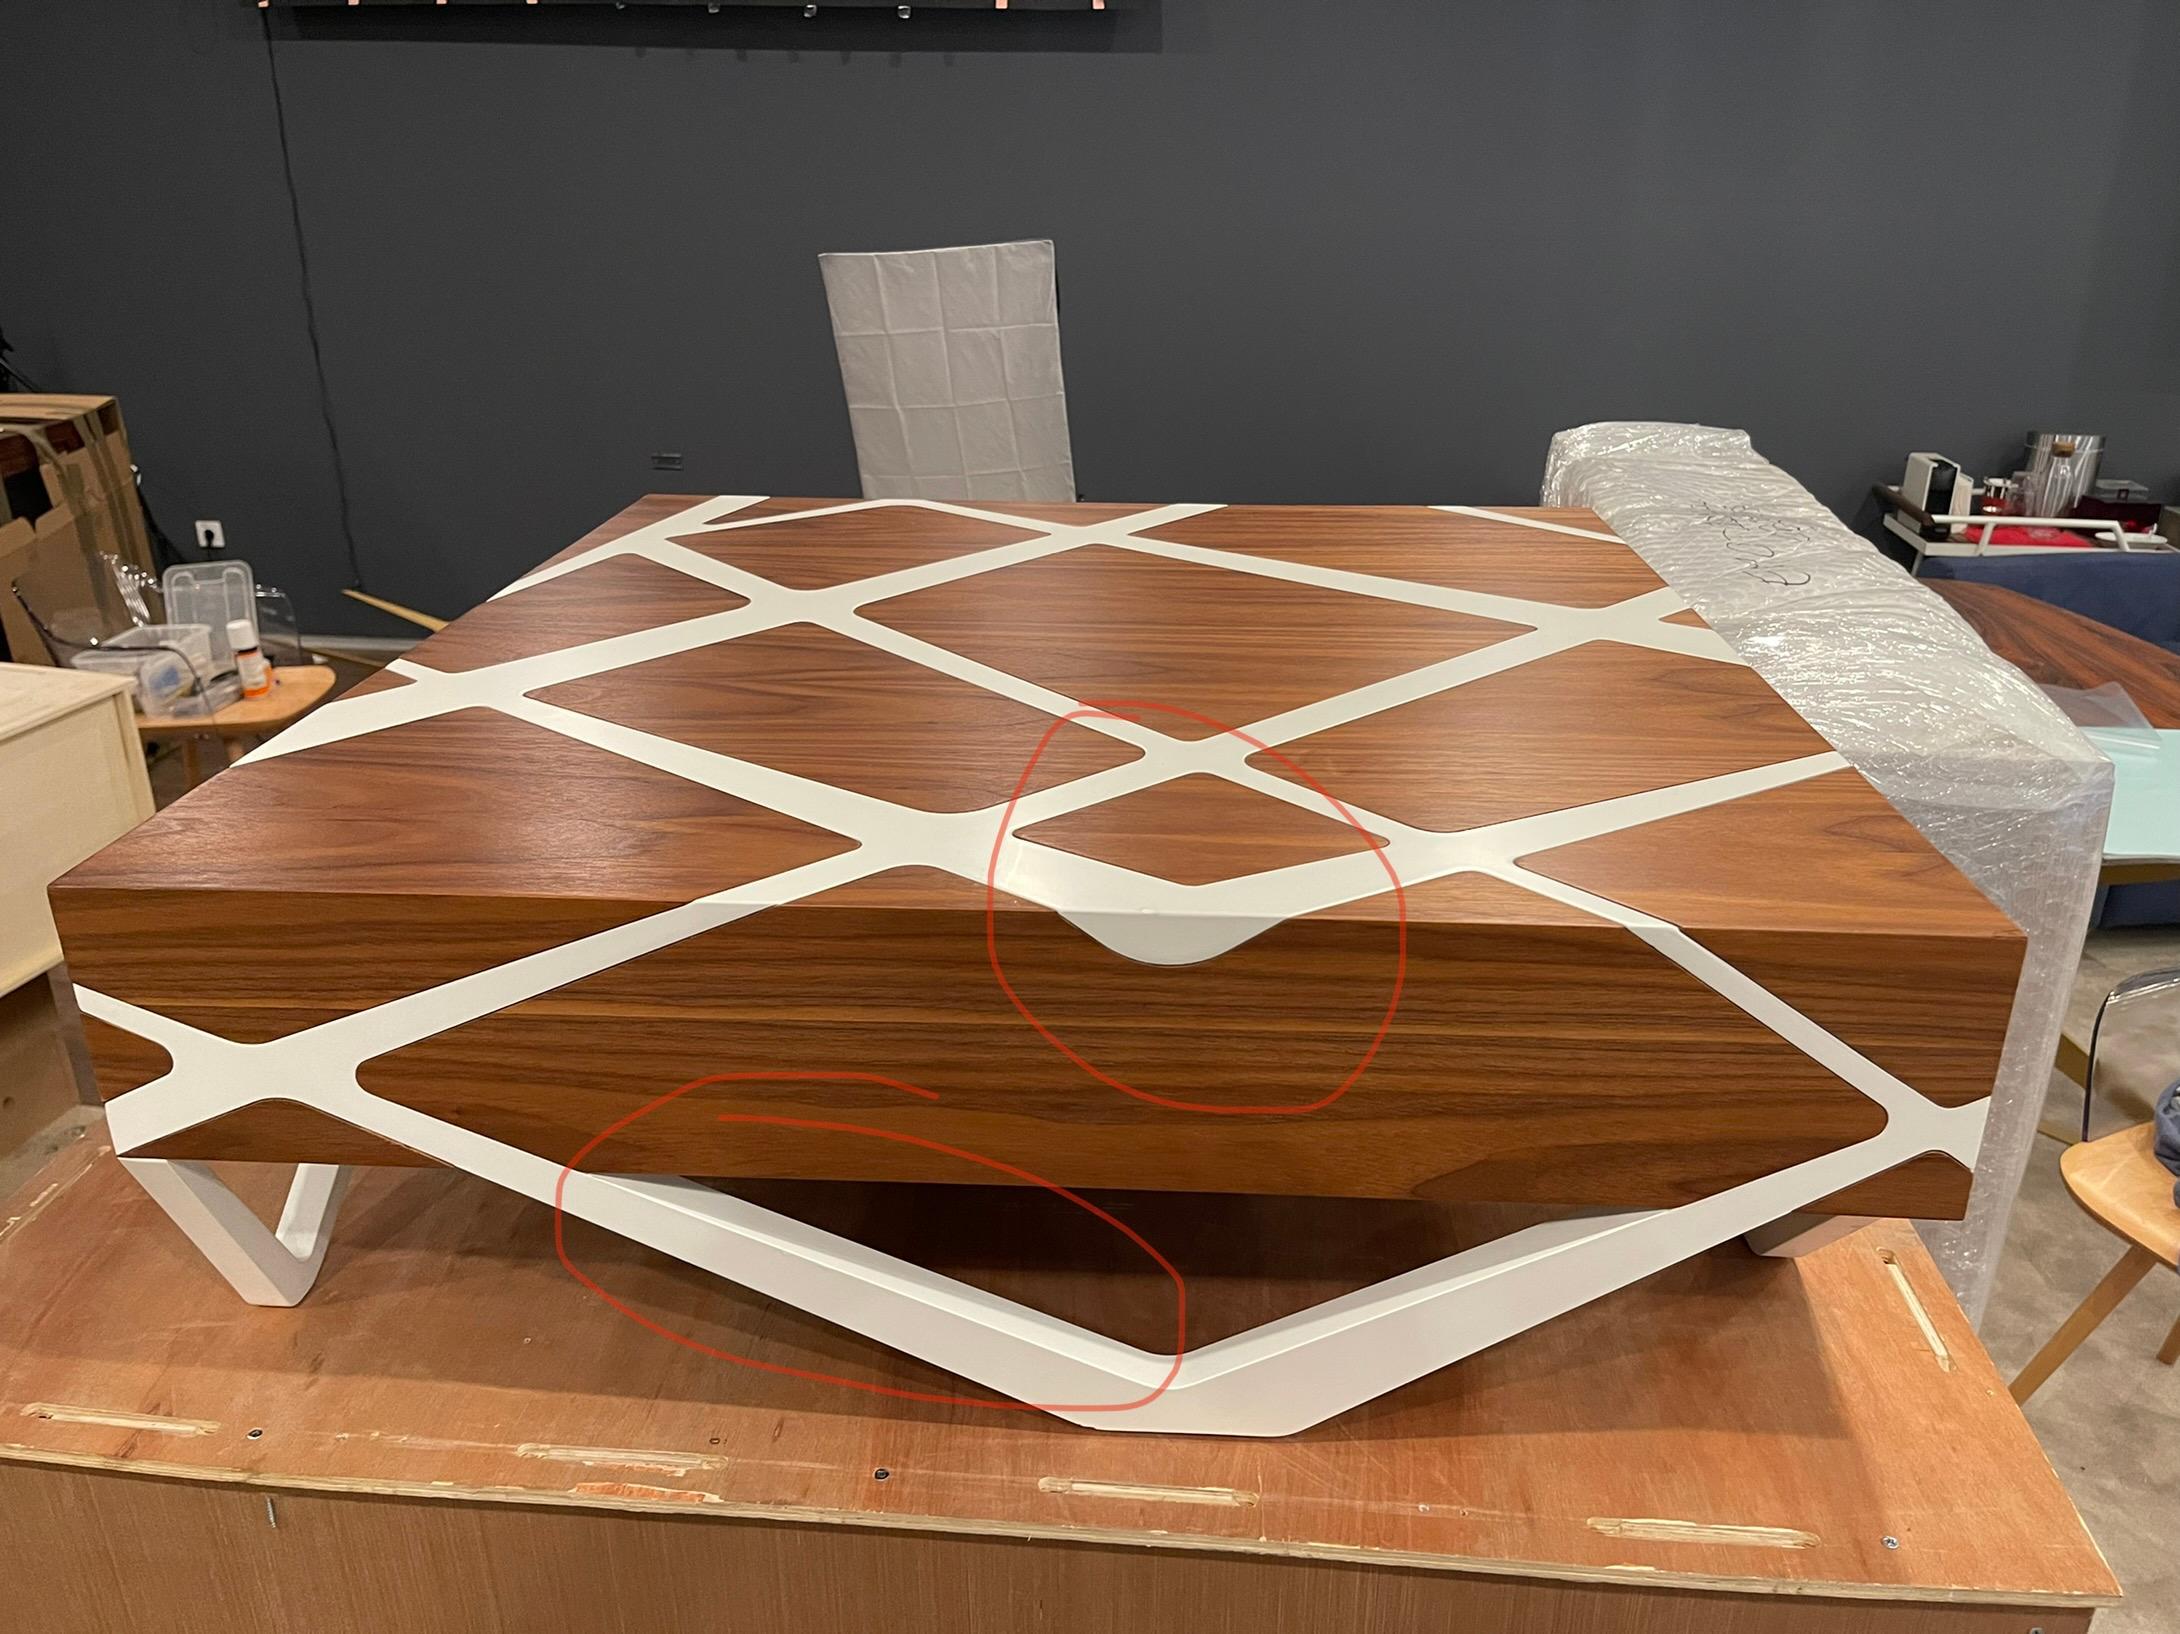 21st Century Modern Center Coffee Table in Walnut Wood and White Showroom Sample 3